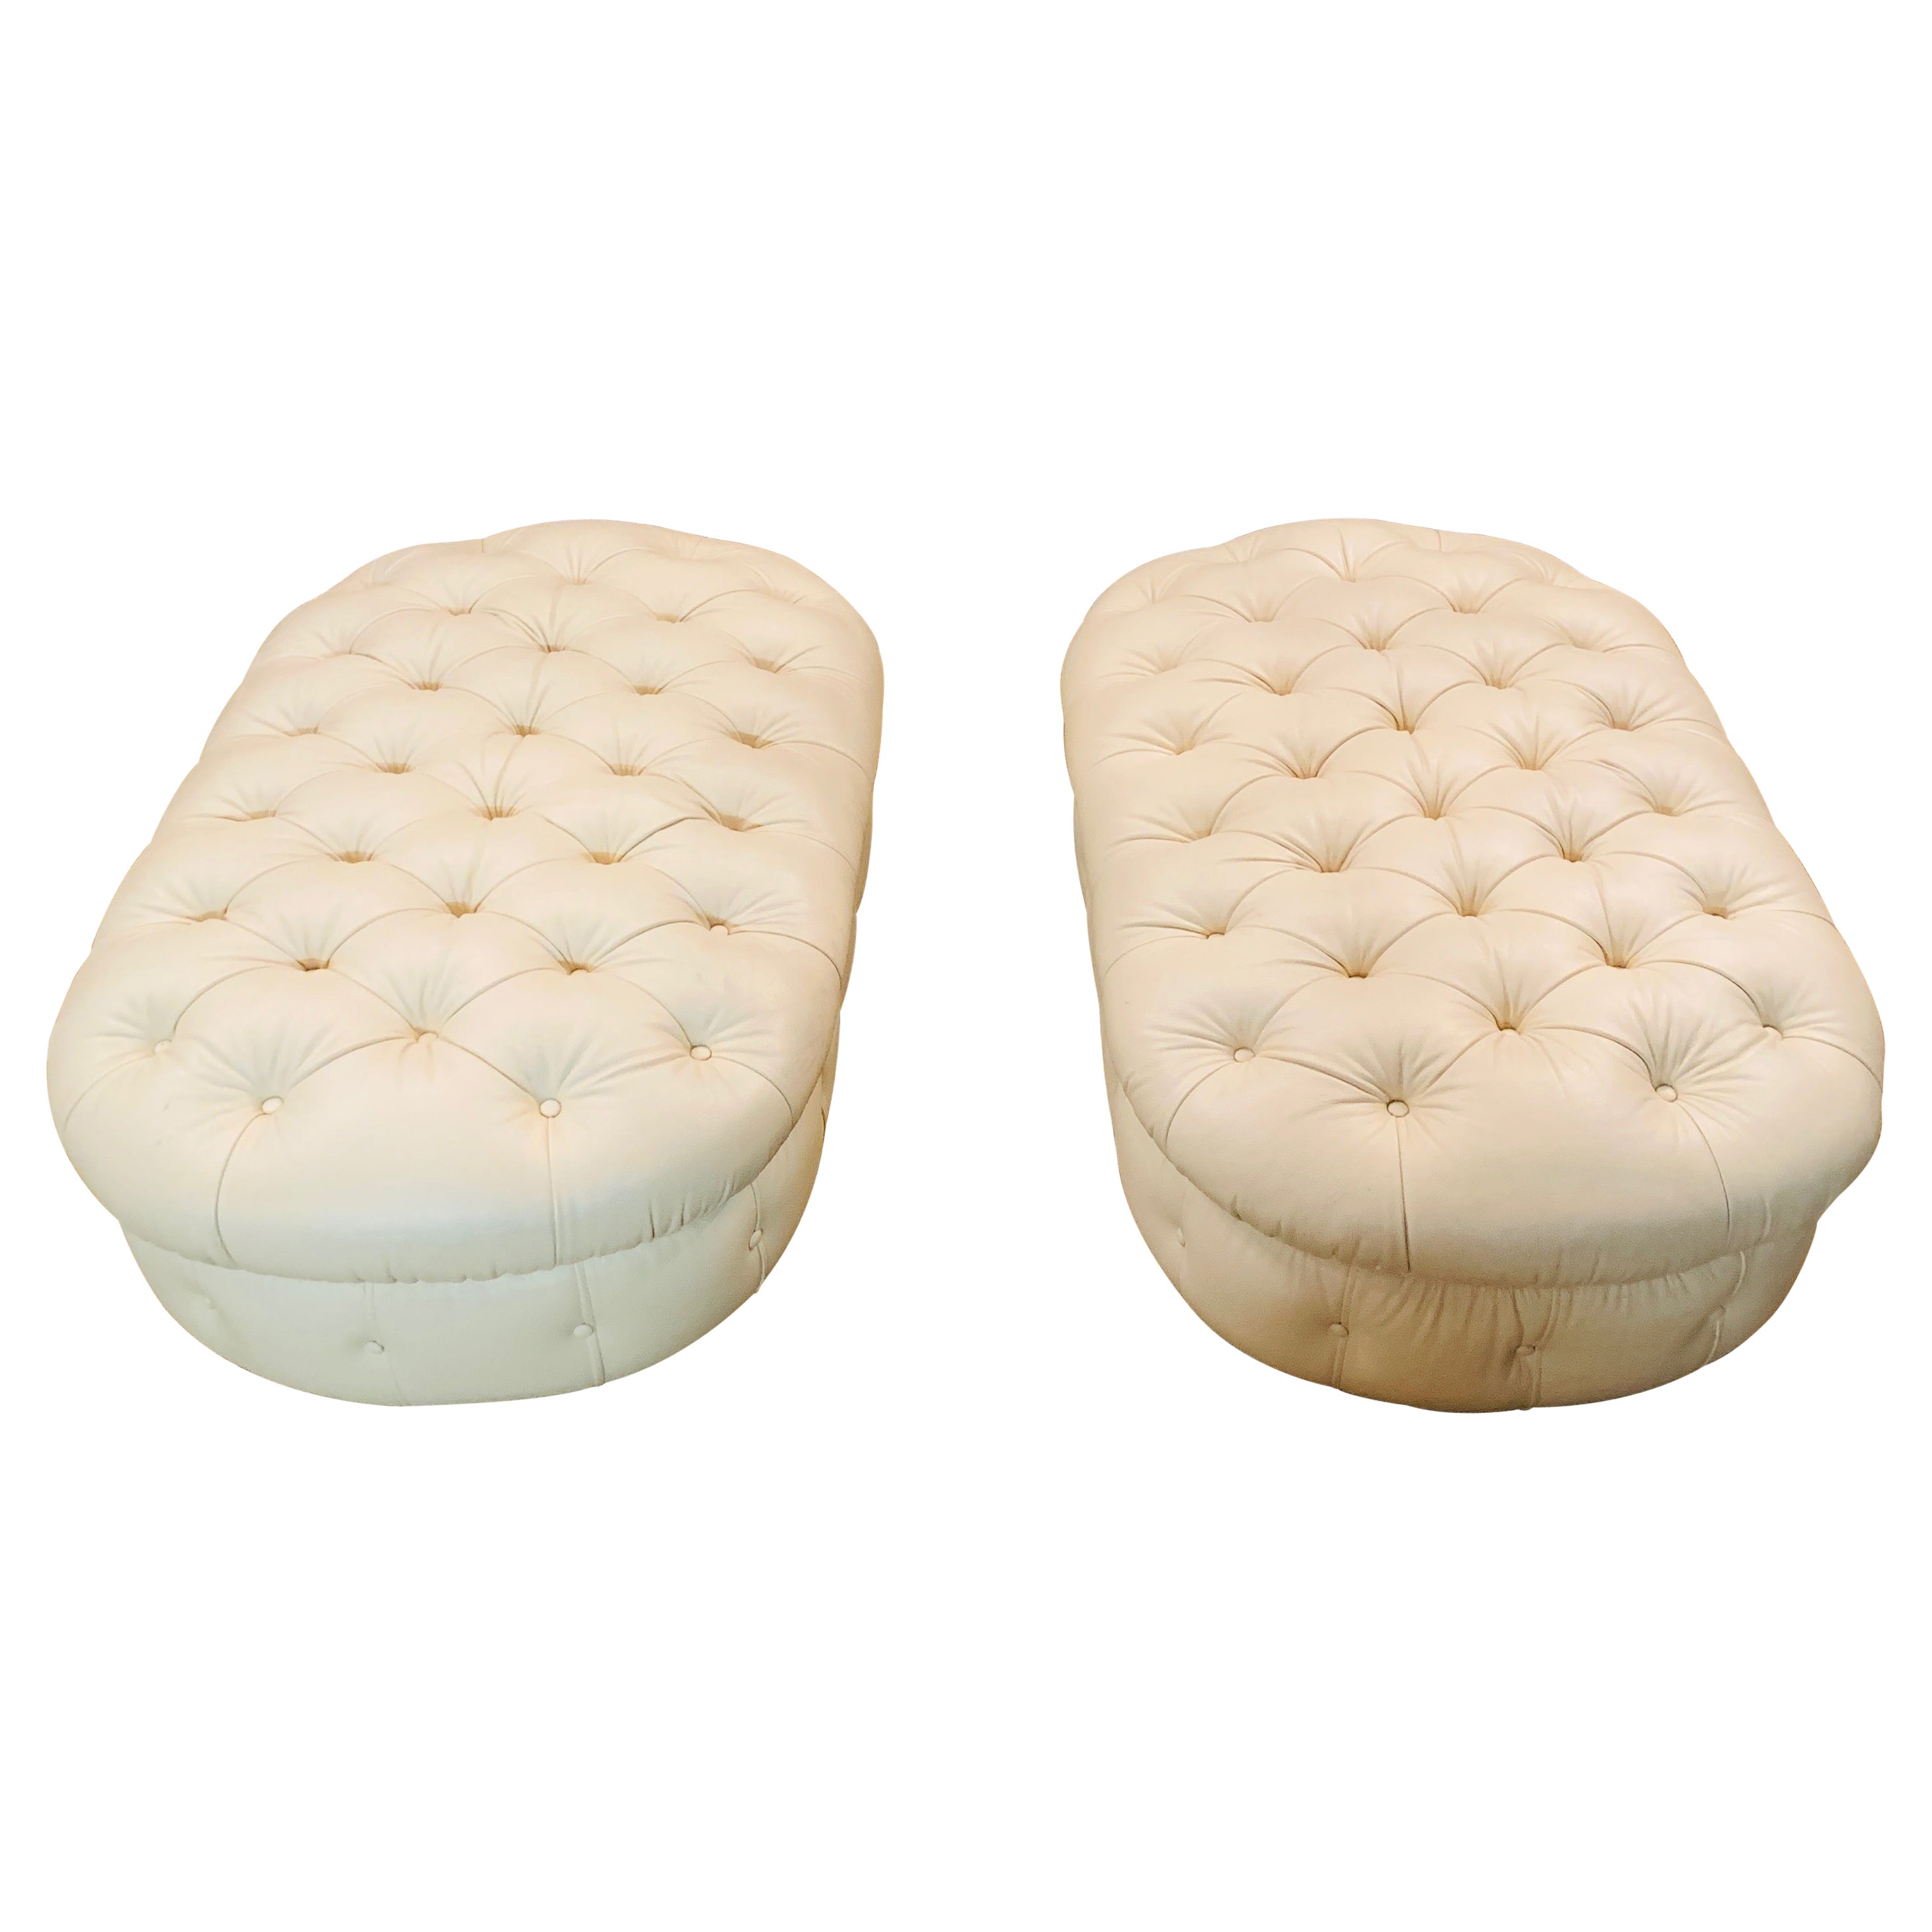 2 Beautiful Chesterfield Stools in Beige Leather Oval Shape